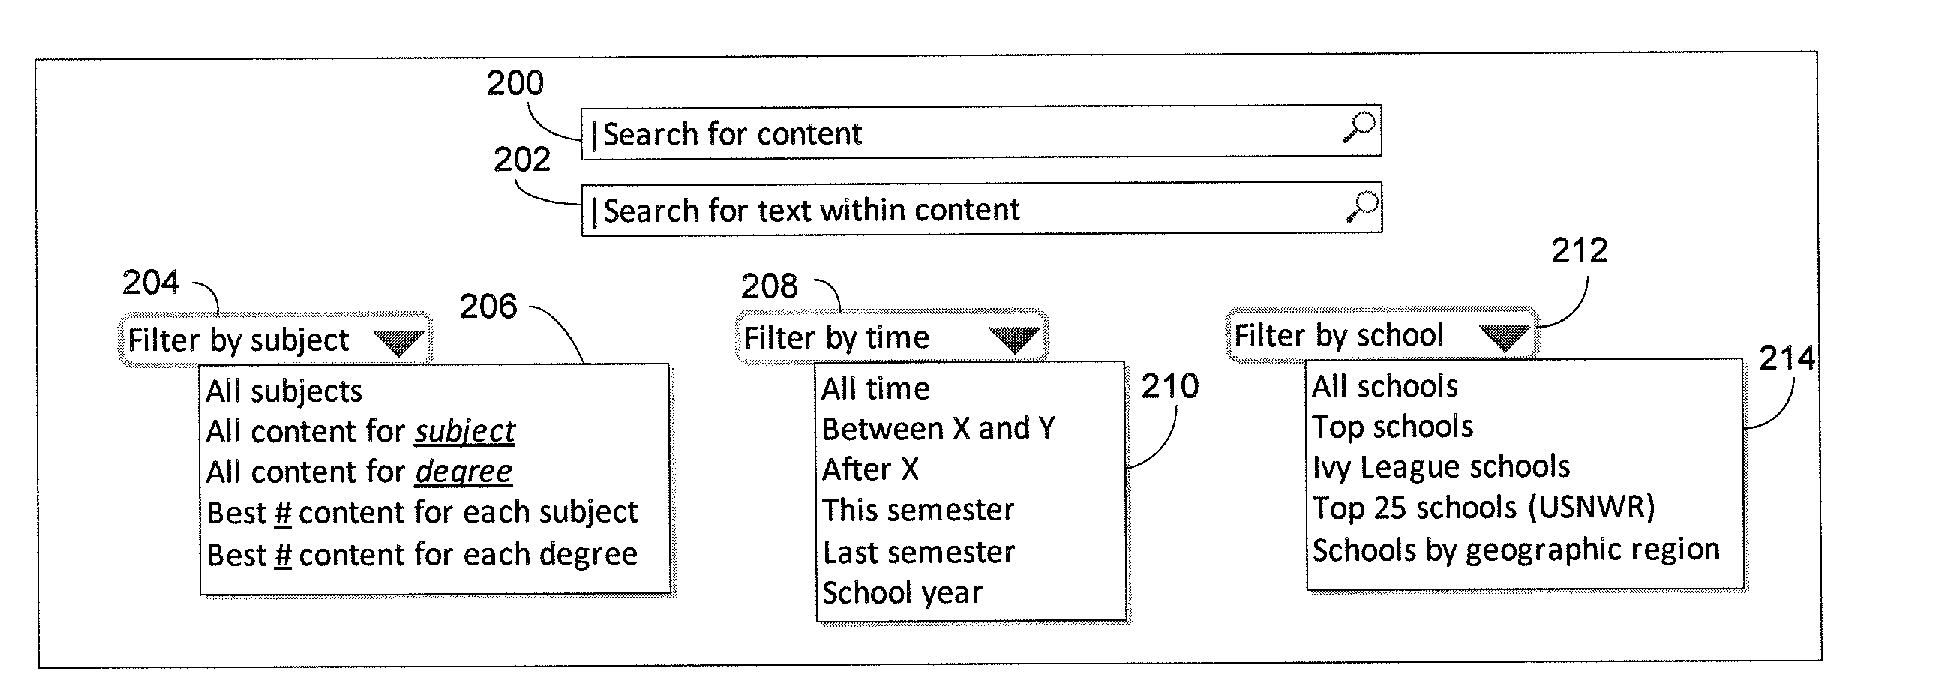 Educational content search and results